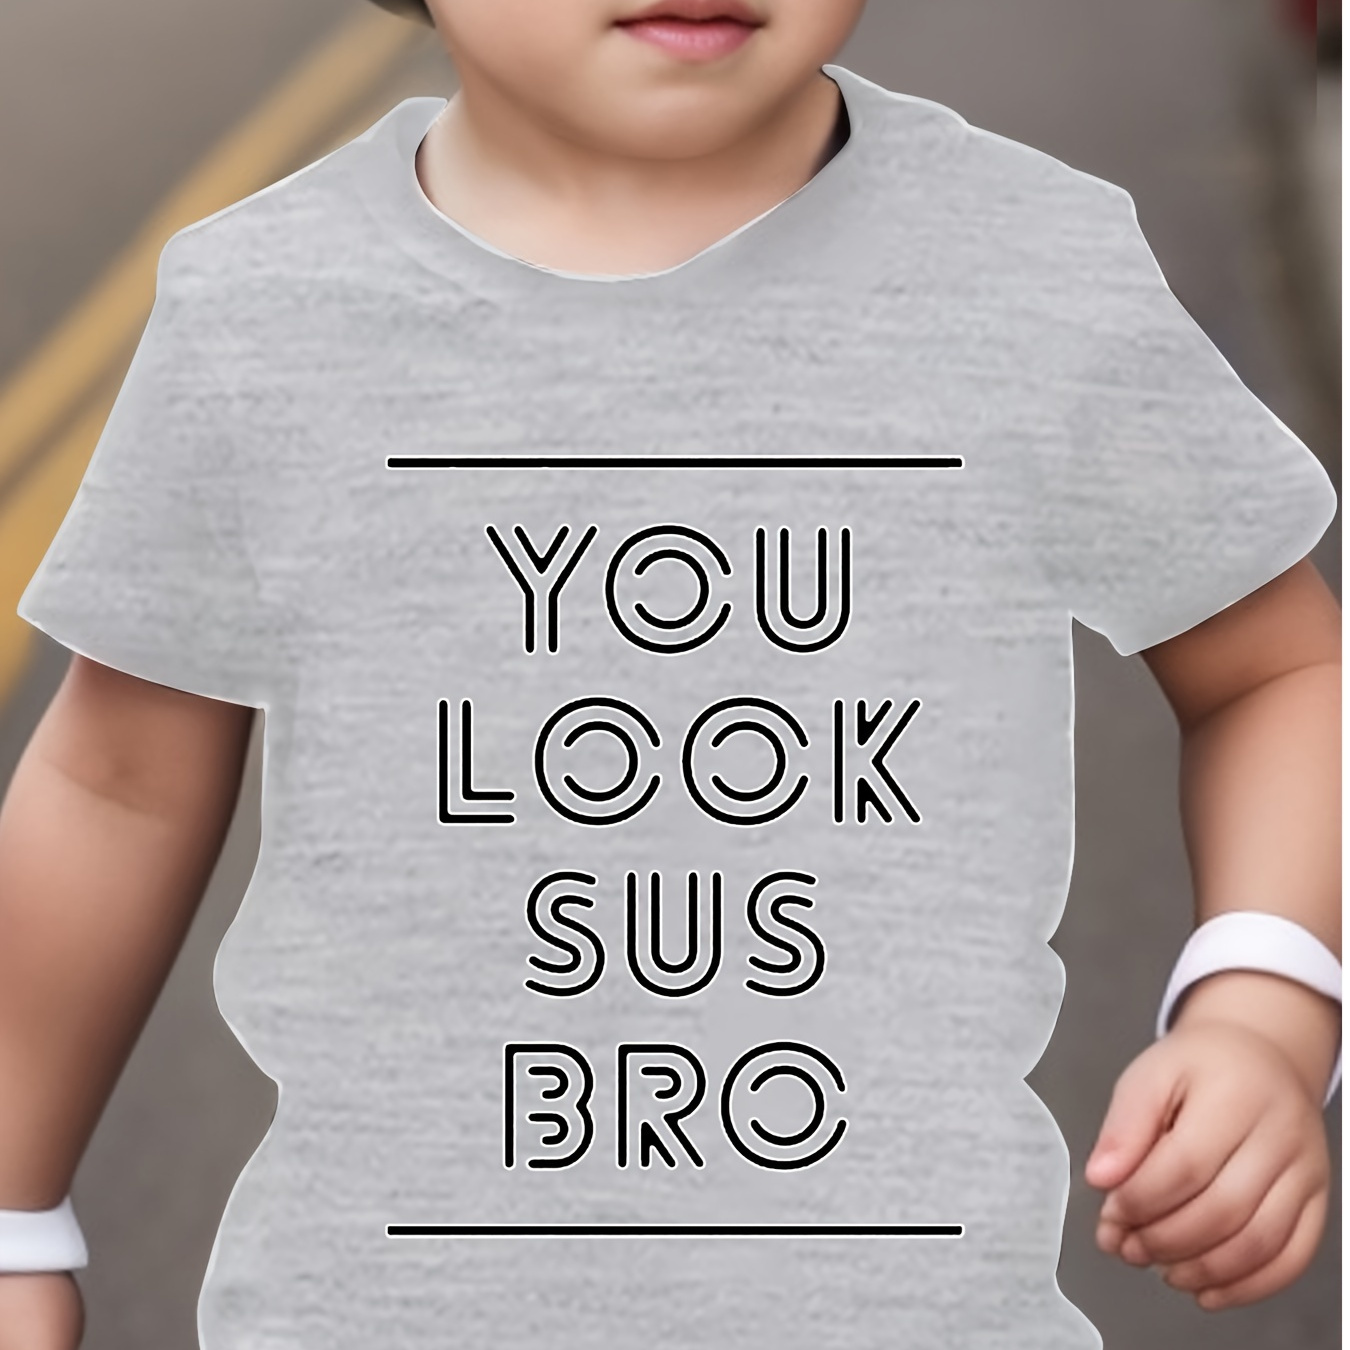 

You Look Sus Bro Letter Print Boys Creative T-shirt, Casual Lightweight Comfy Short Sleeve Tee Tops, Kids Clothings For Summer